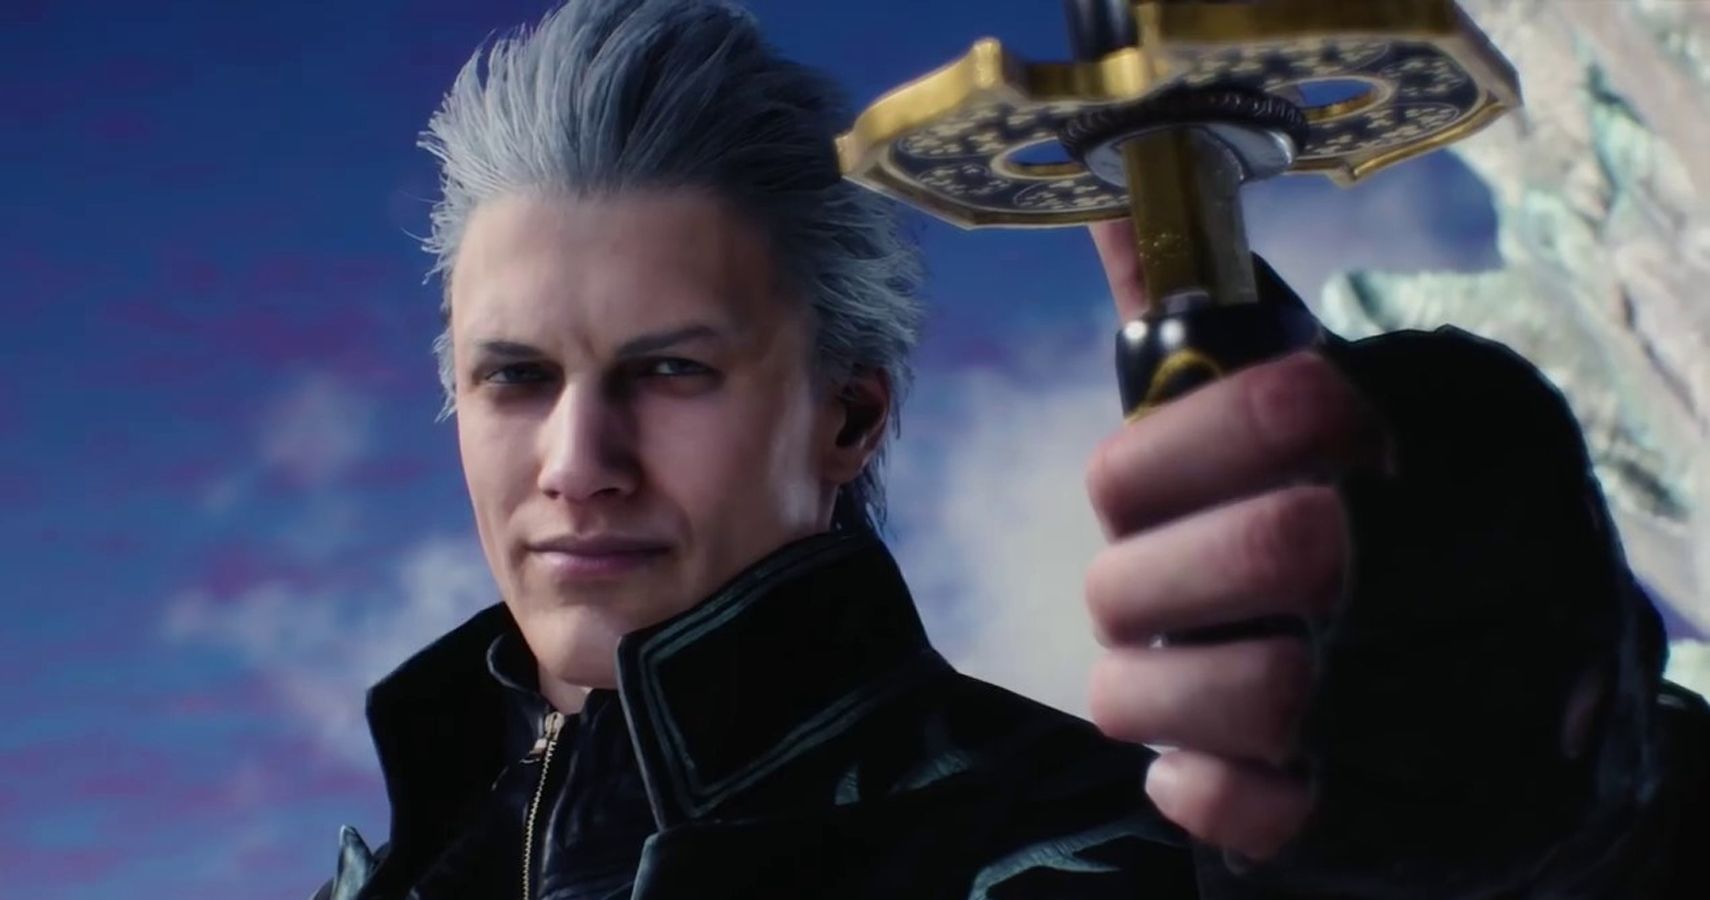 Devil May Cry 5's Vergil Will Come to PS4, Xbox One